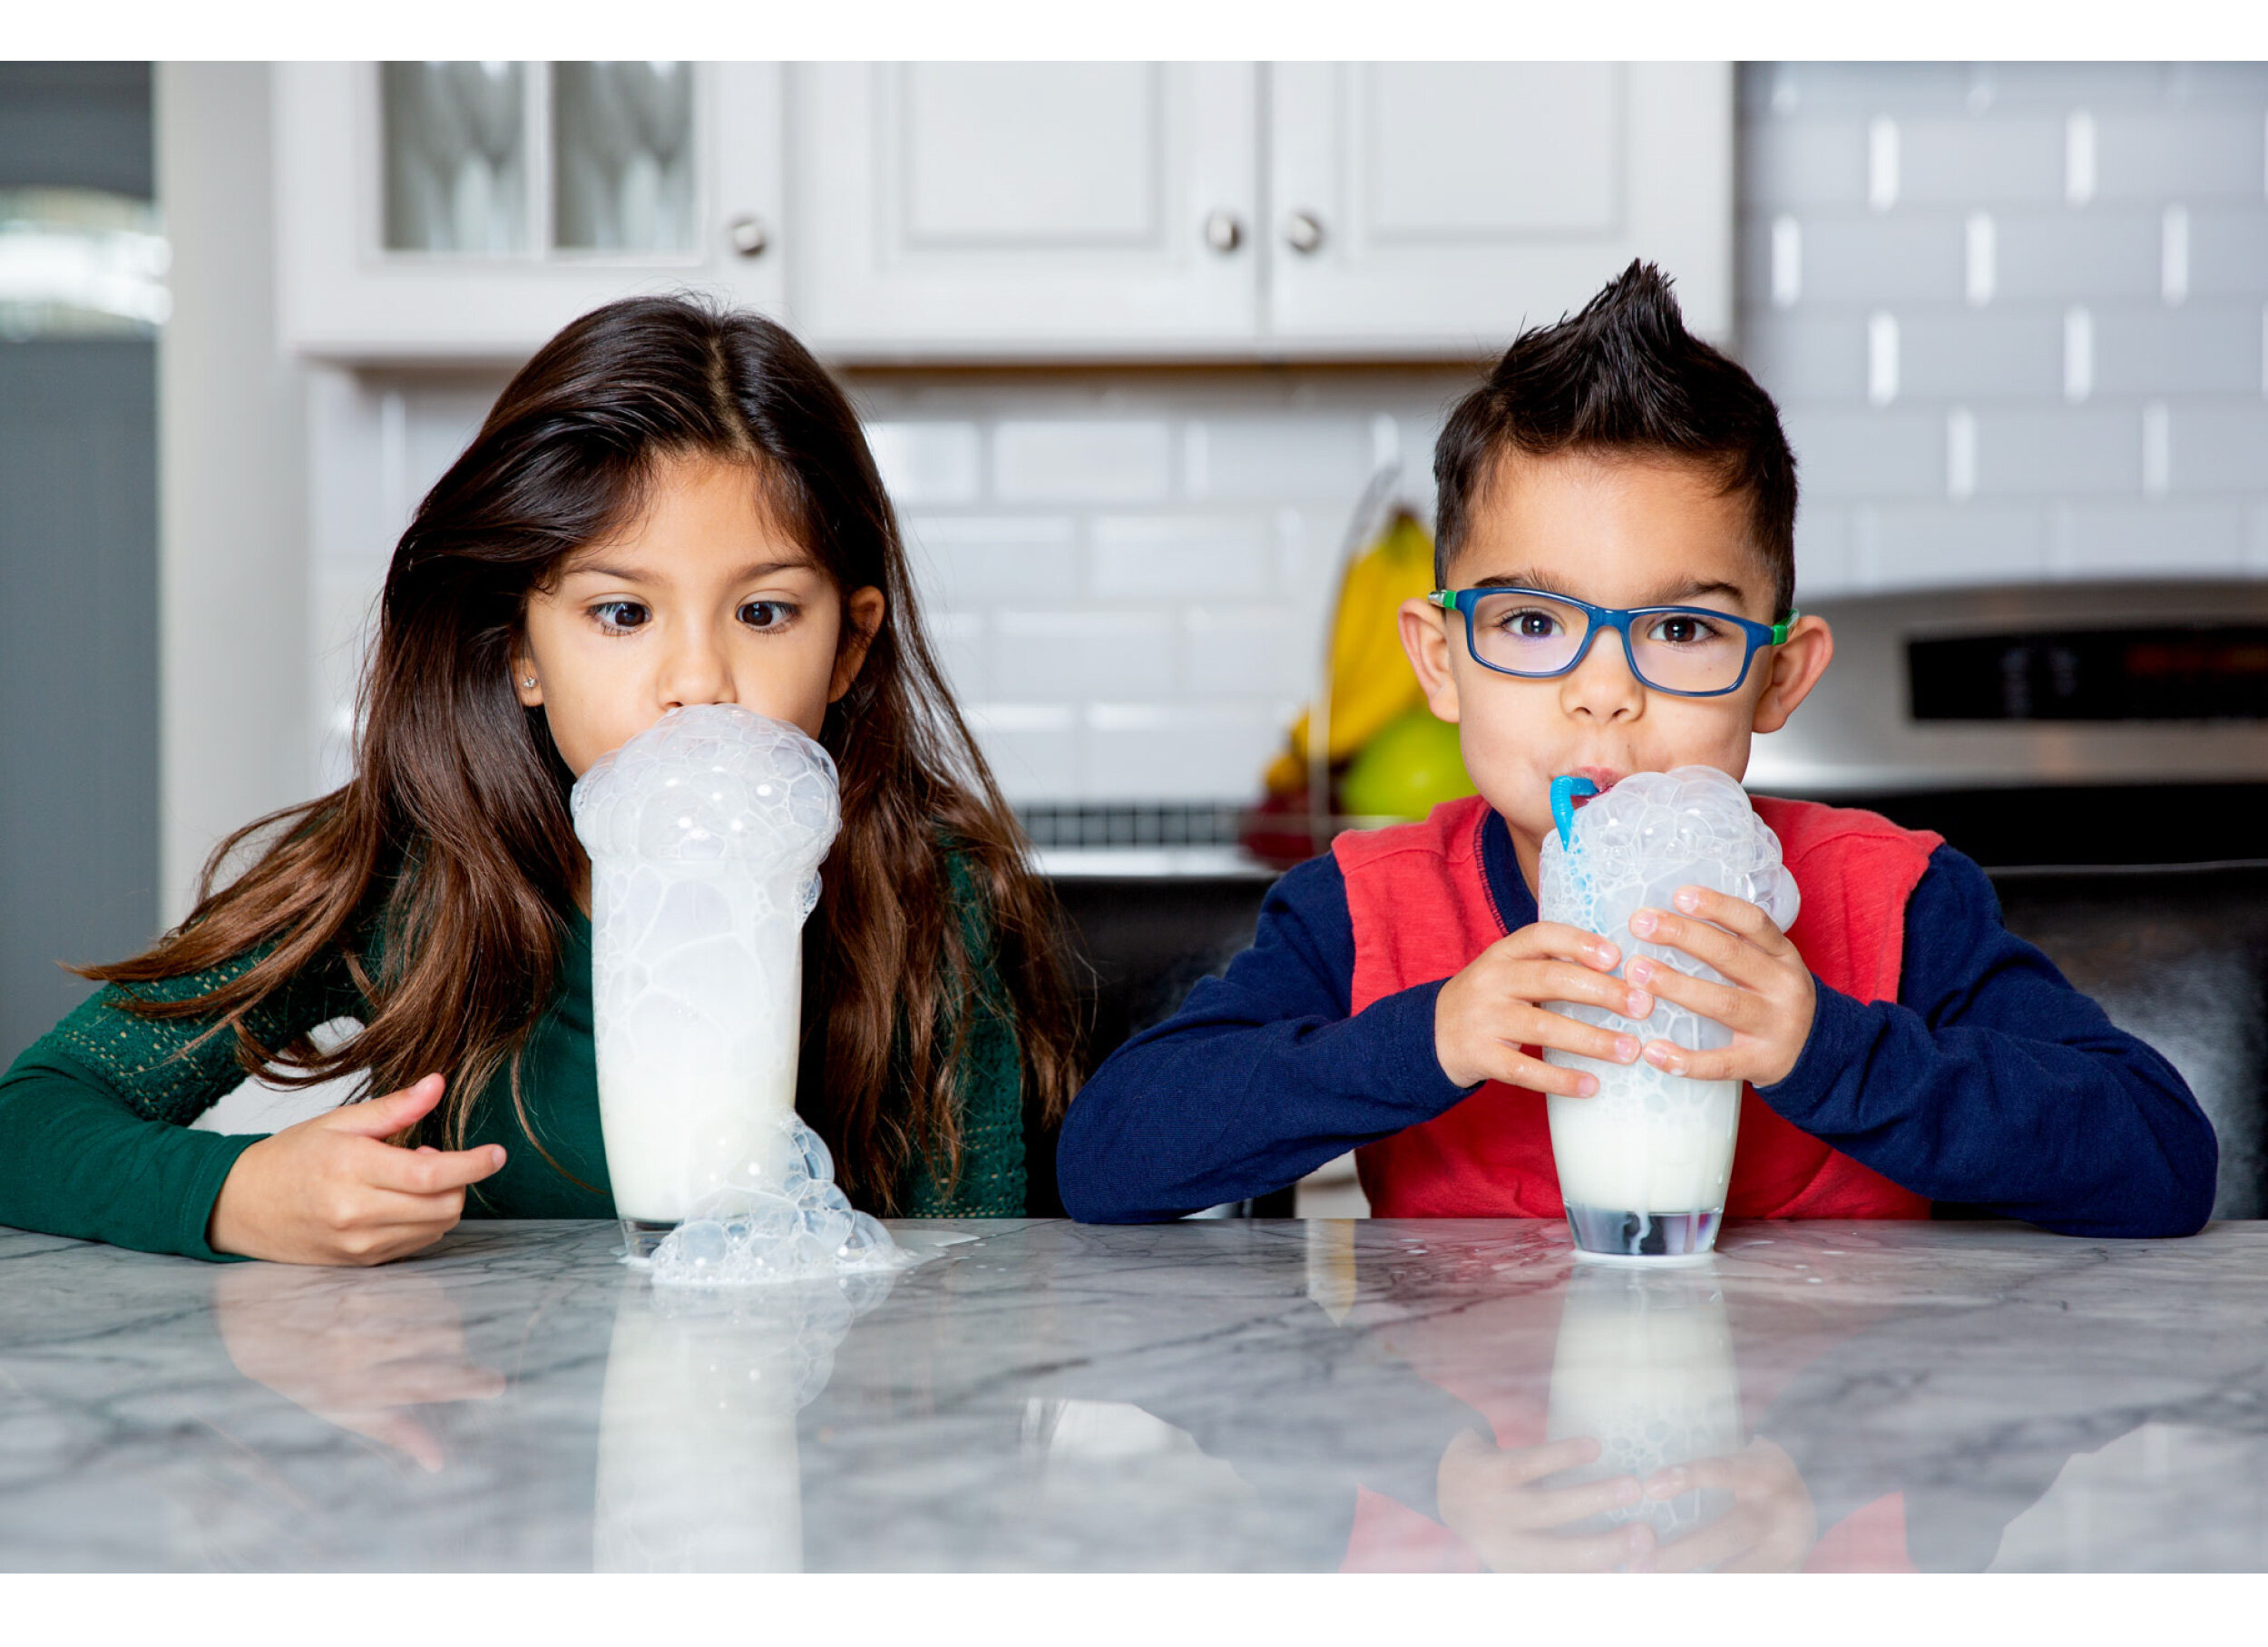  Two kids sit at a kitchen counter blowing bubbles into their glasses of milk. 